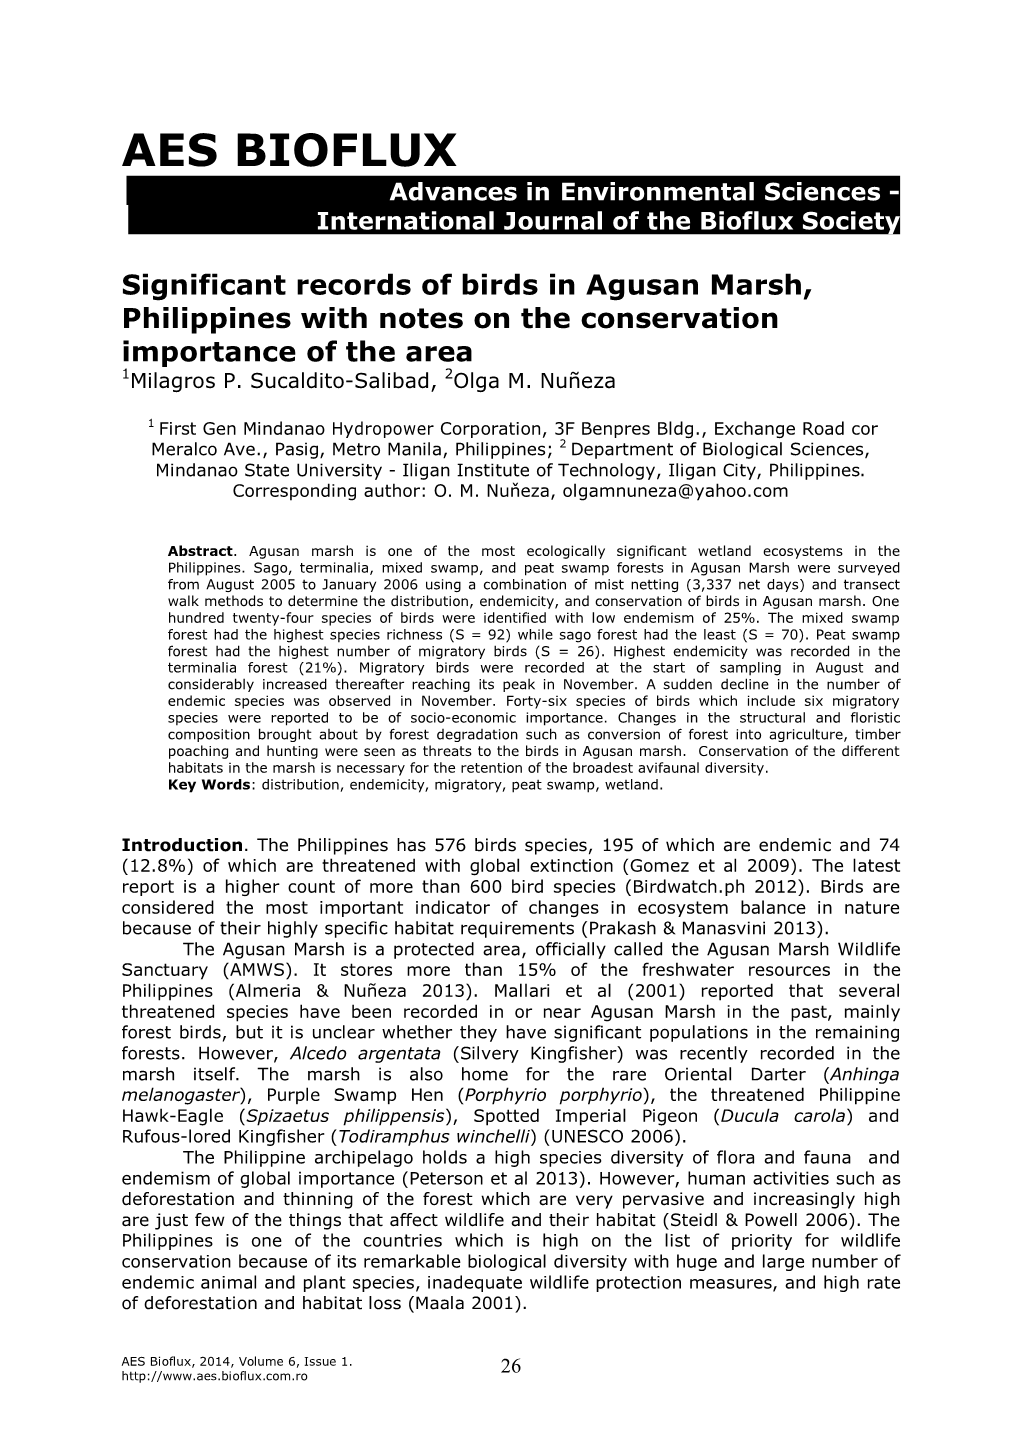 Significant Records of Birds in Agusan Marsh, Philippines with Notes on the Conservation Importance of the Area 1Milagros P